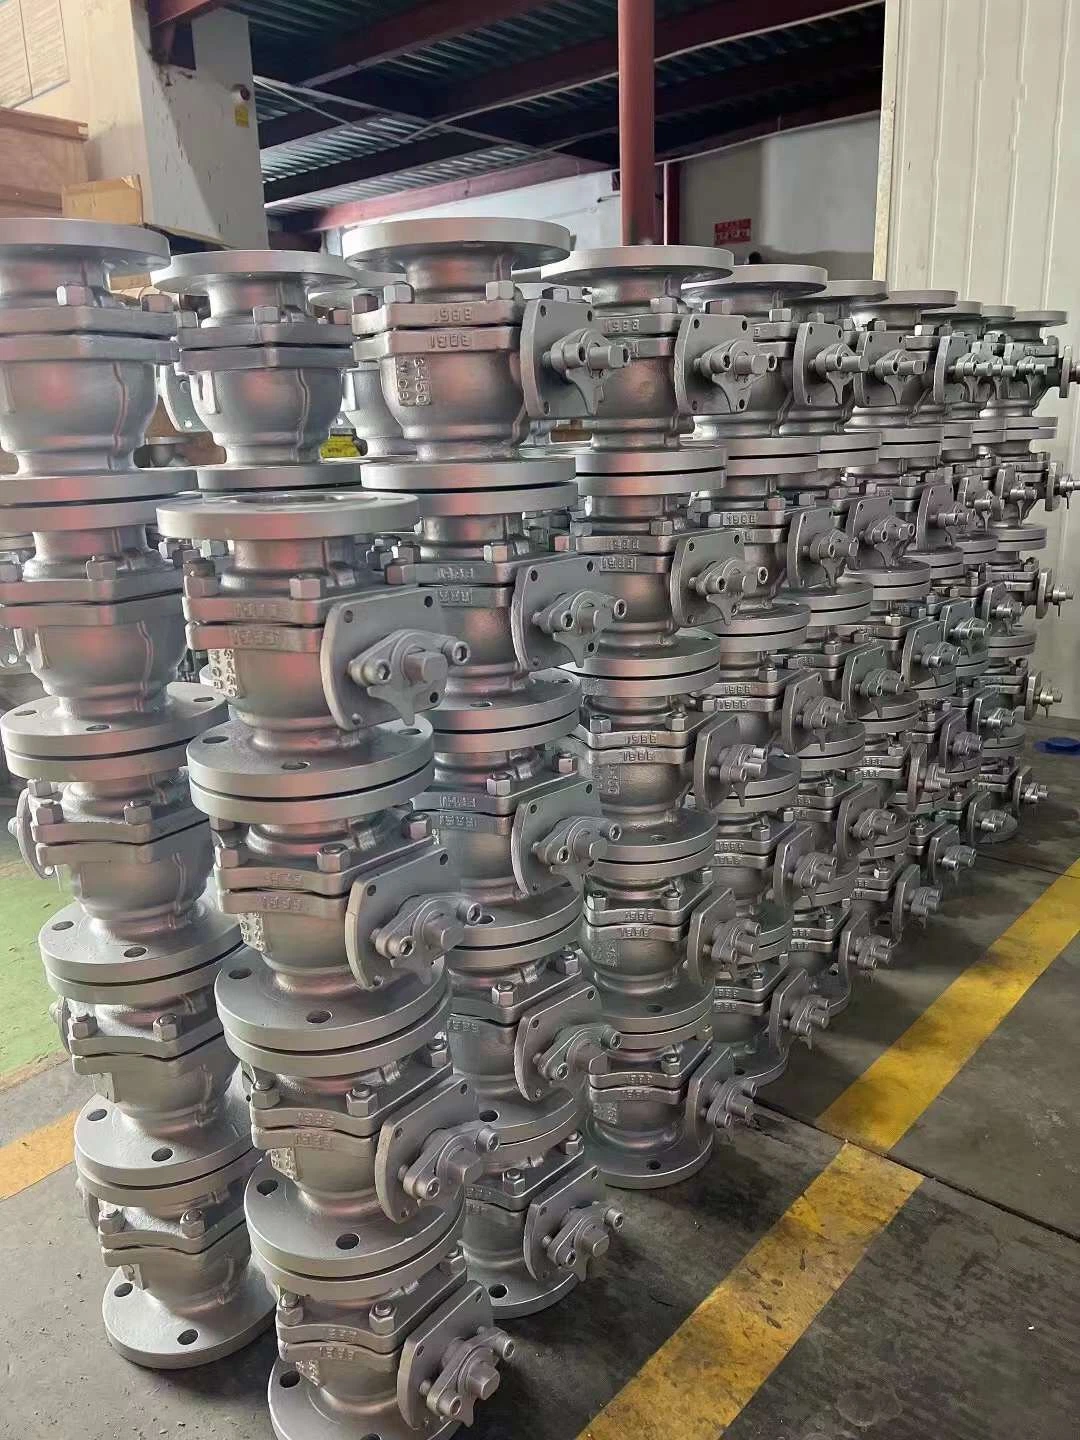 BS1868/API 600 OEM/ODM Carbon/Stainless Steel Class 150 Flanged/Welded Bevel Gear Electric/Pneumatic/Hydraulic Industrial Oil Gas Water OS&Y Wedge Globe Valve